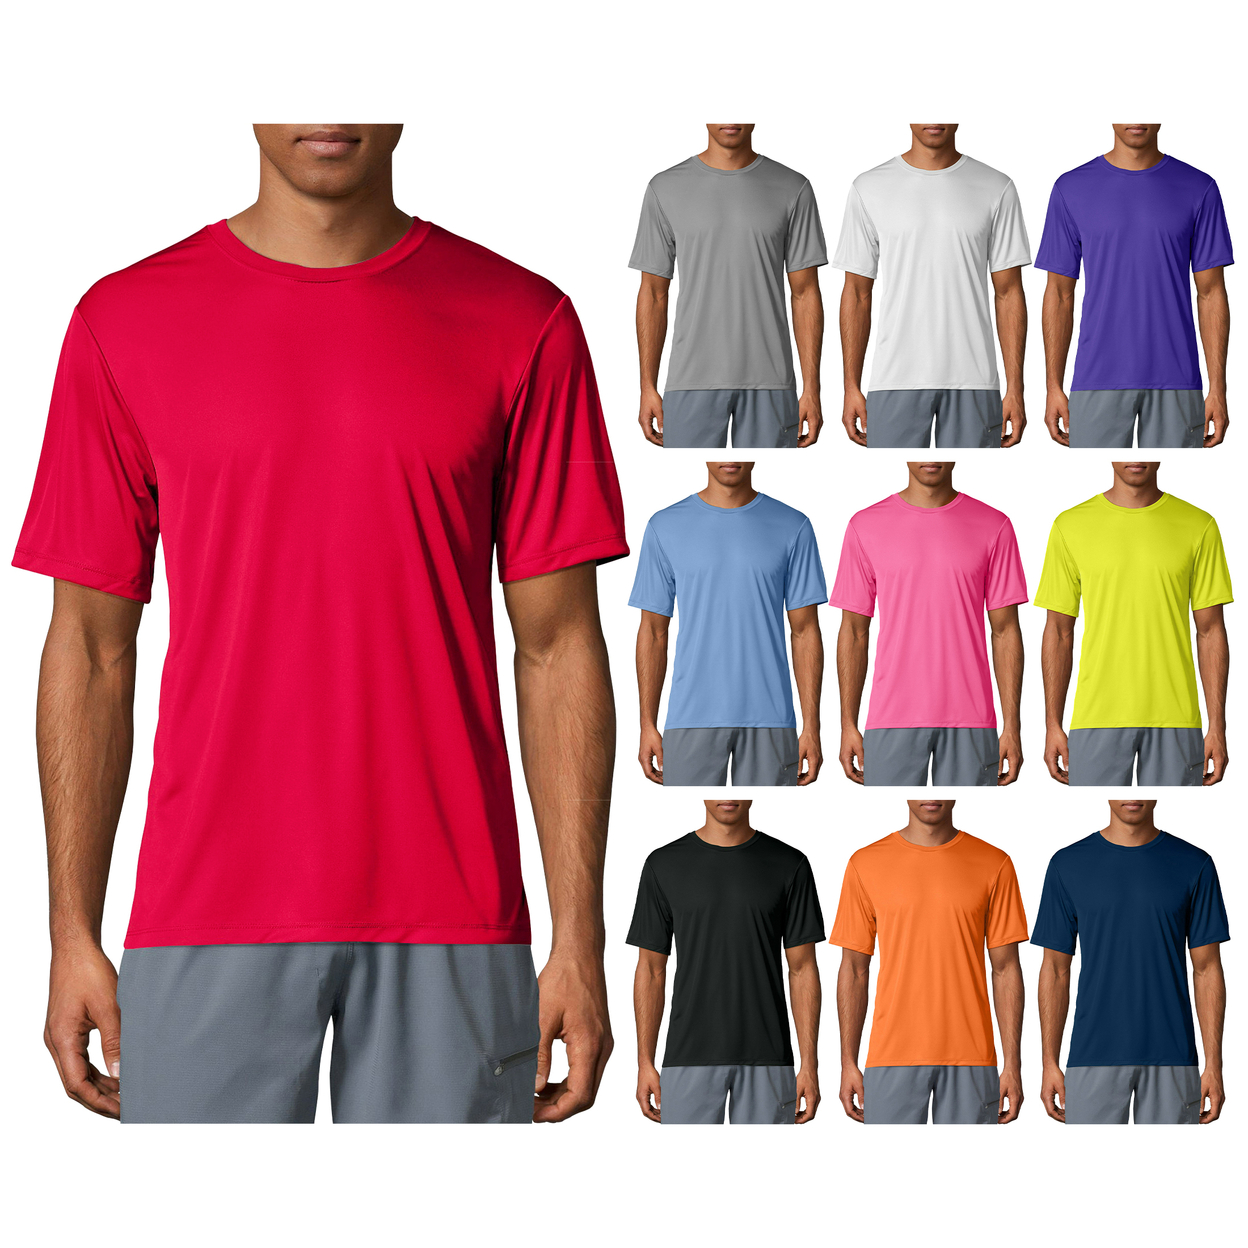 Multi-Pack: Men's Moisture Wicking Cool Dri-Fit Performance Short Sleeve Crew Neck T-Shirts - 3-pack, Small